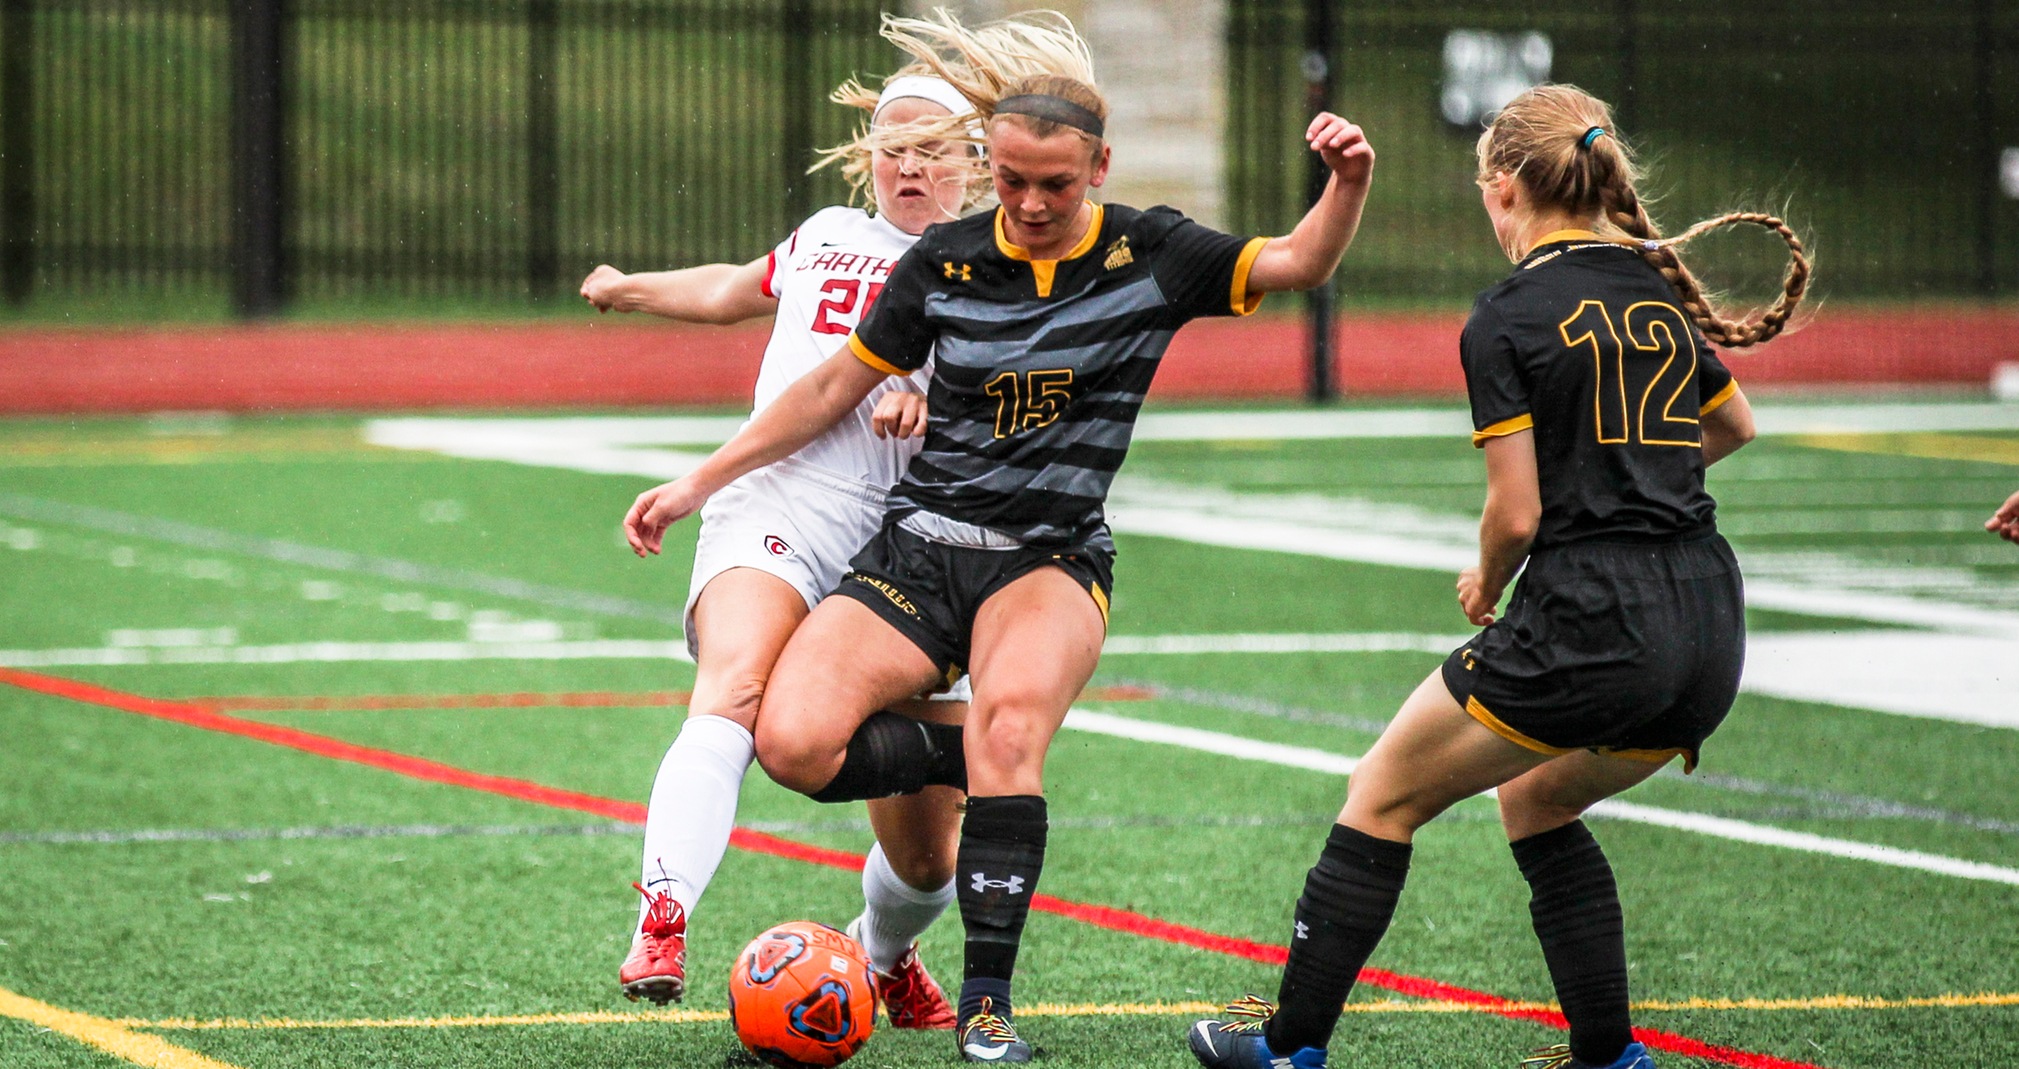 Kylee Brown gave UW-Oshkosh a 1-0 lead with her first collegiate goal.